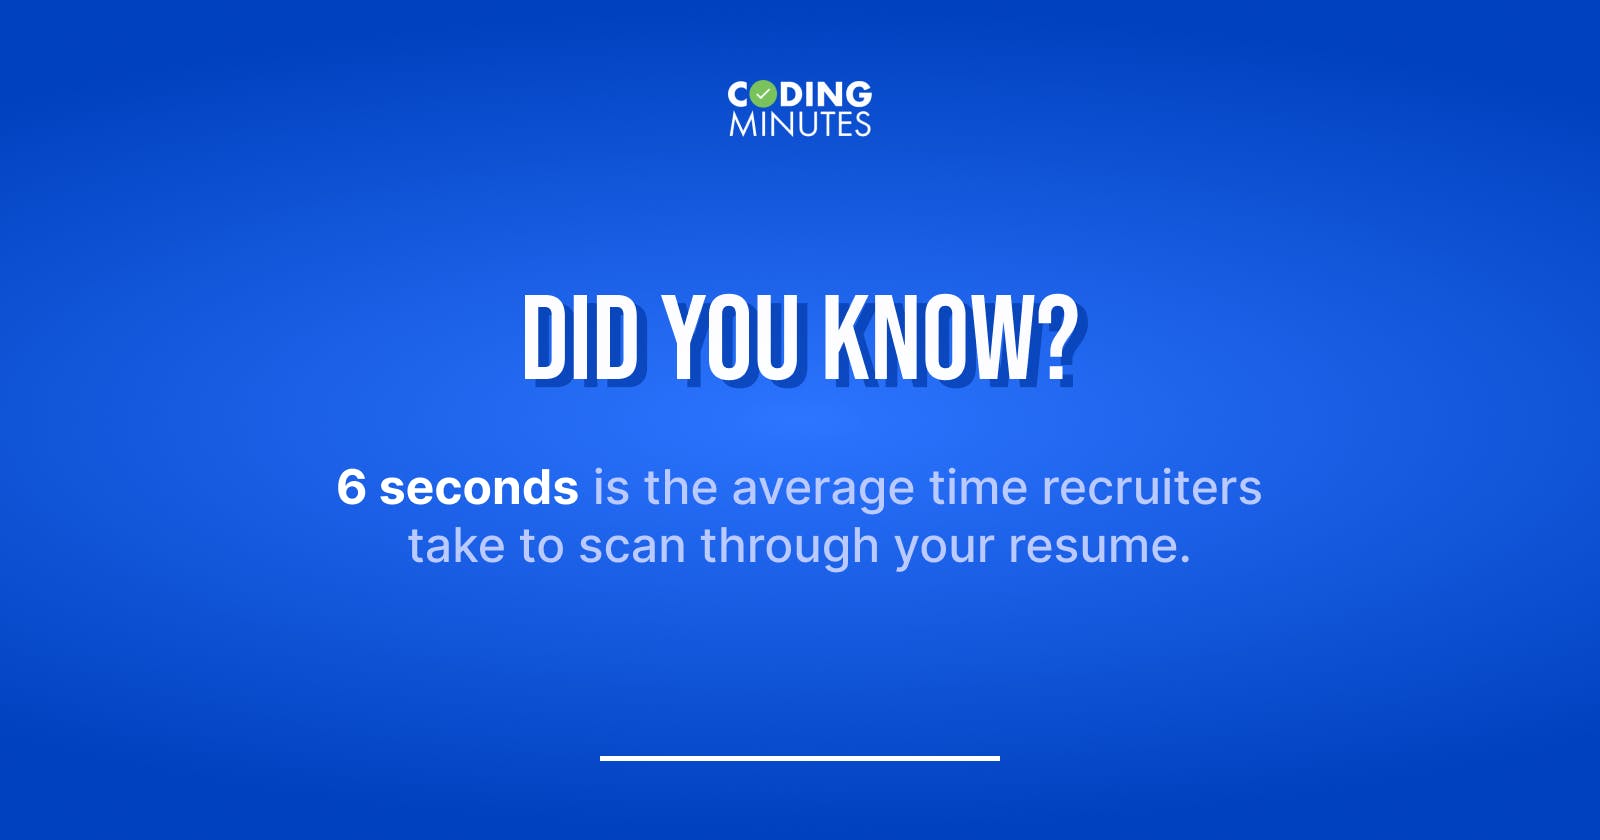 Average time to scan through a resume